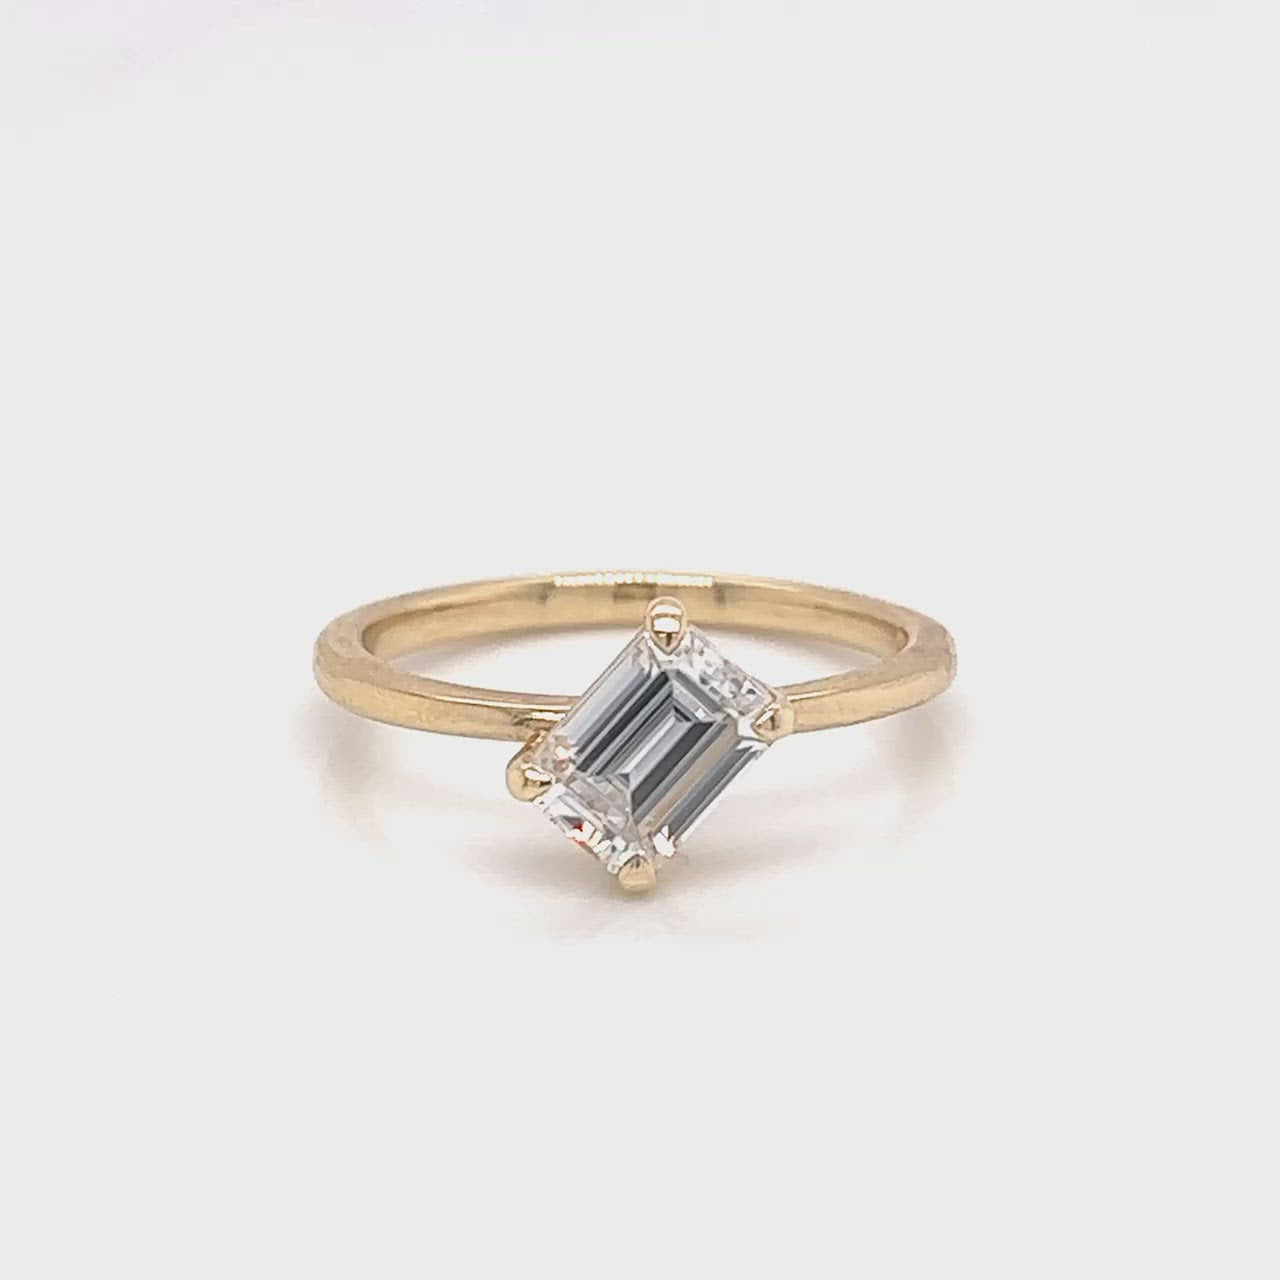 Natalia Ring with a 0.92 Carat White Moissanite in 14k Yellow Gold - Ready to Size and Ship